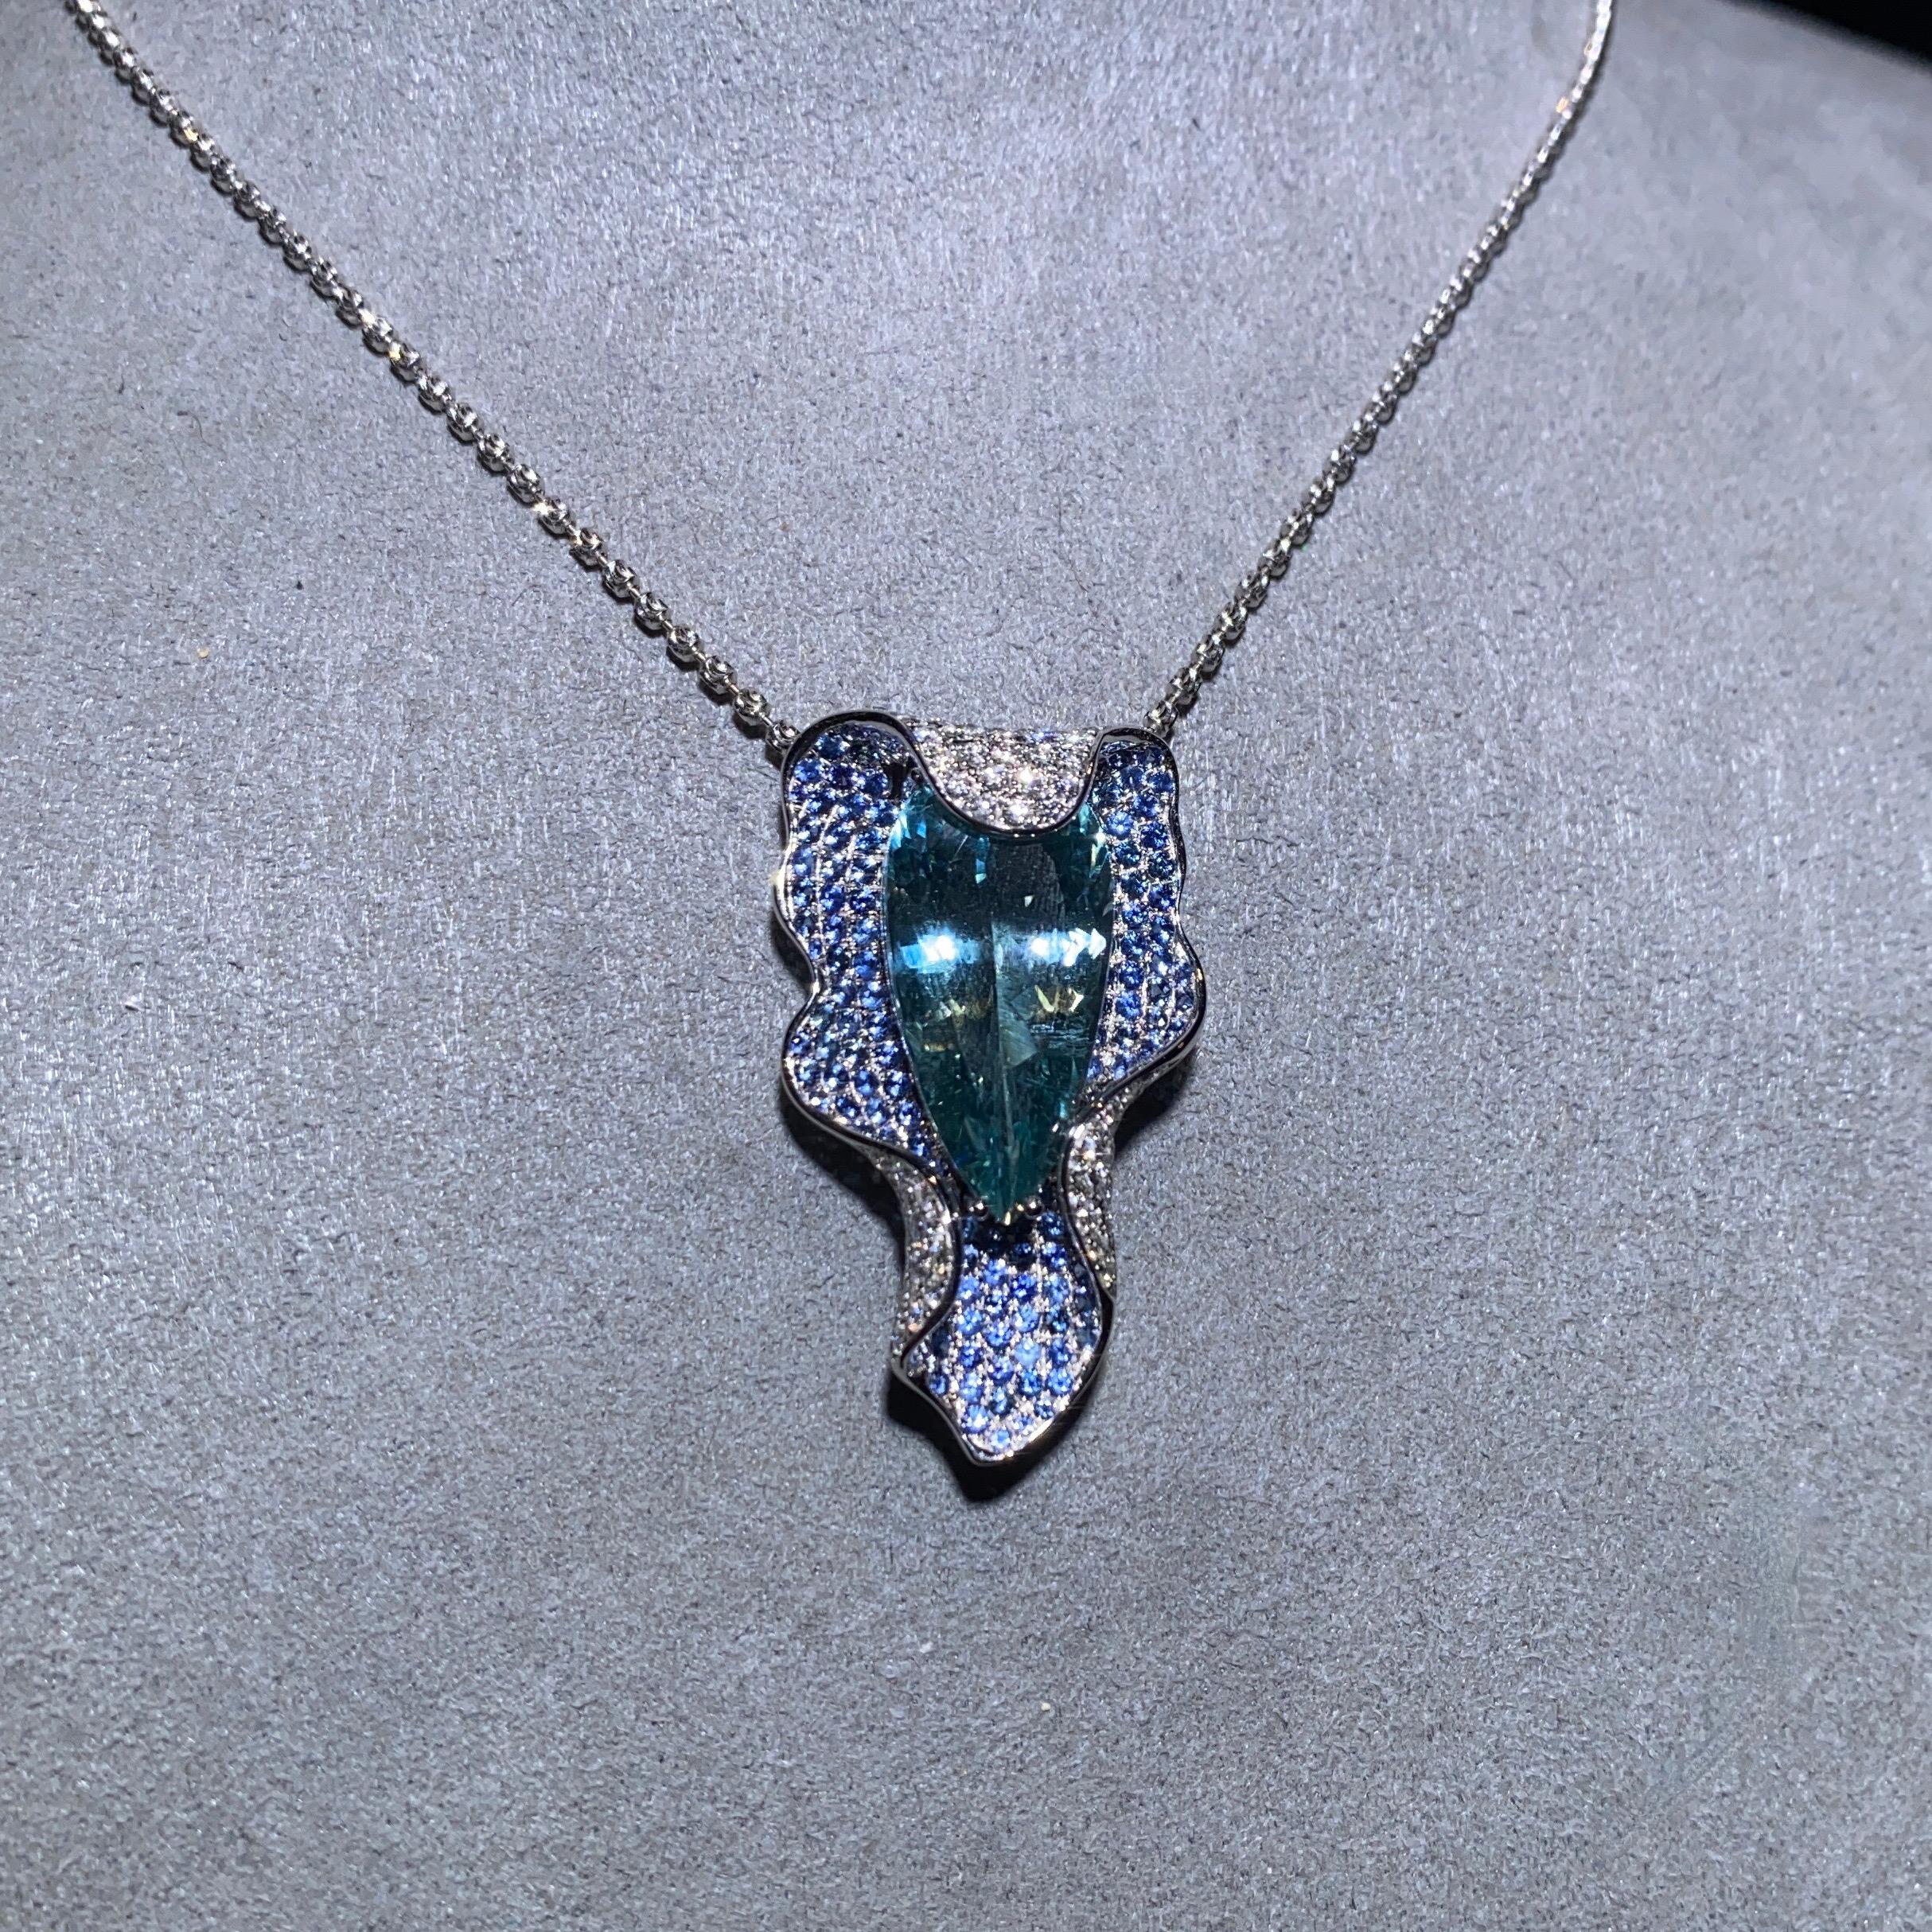 This is a Calla Lily inspired Aquamarine, Sapphire and Diamond Pendant. In the language of flowers, calla lilies mean “beauty.” The name derives from the Greek word for beauty, kallos. This flower is also associated with faithfulness and purity. On